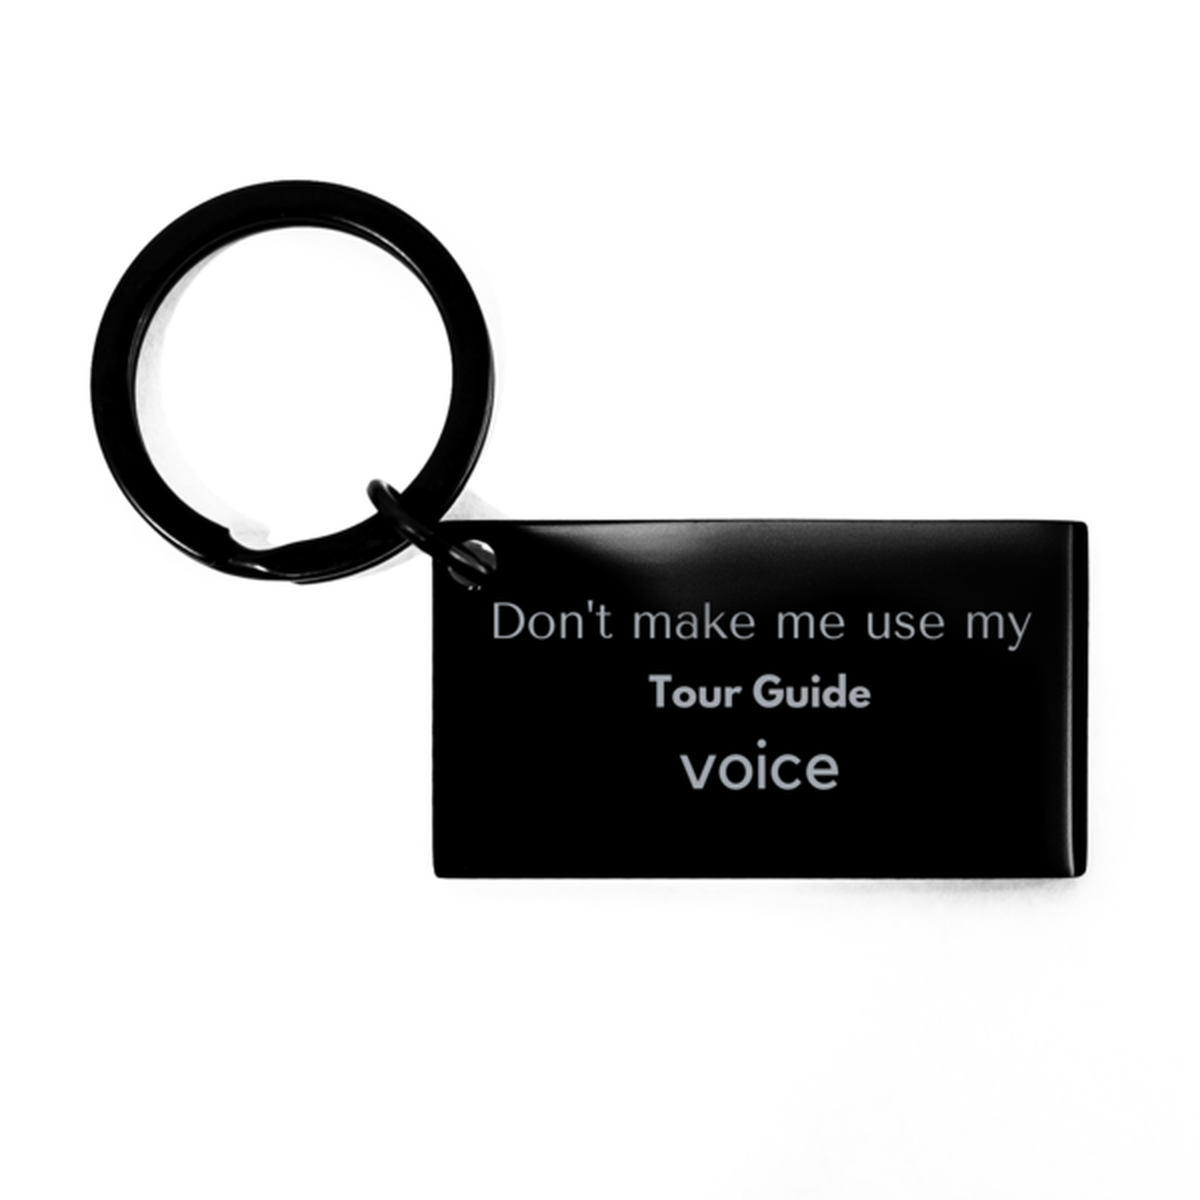 Don't make me use my Tour Guide voice, Sarcasm Tour Guide Gifts, Christmas Tour Guide Keychain Birthday Unique Gifts For Tour Guide Coworkers, Men, Women, Colleague, Friends